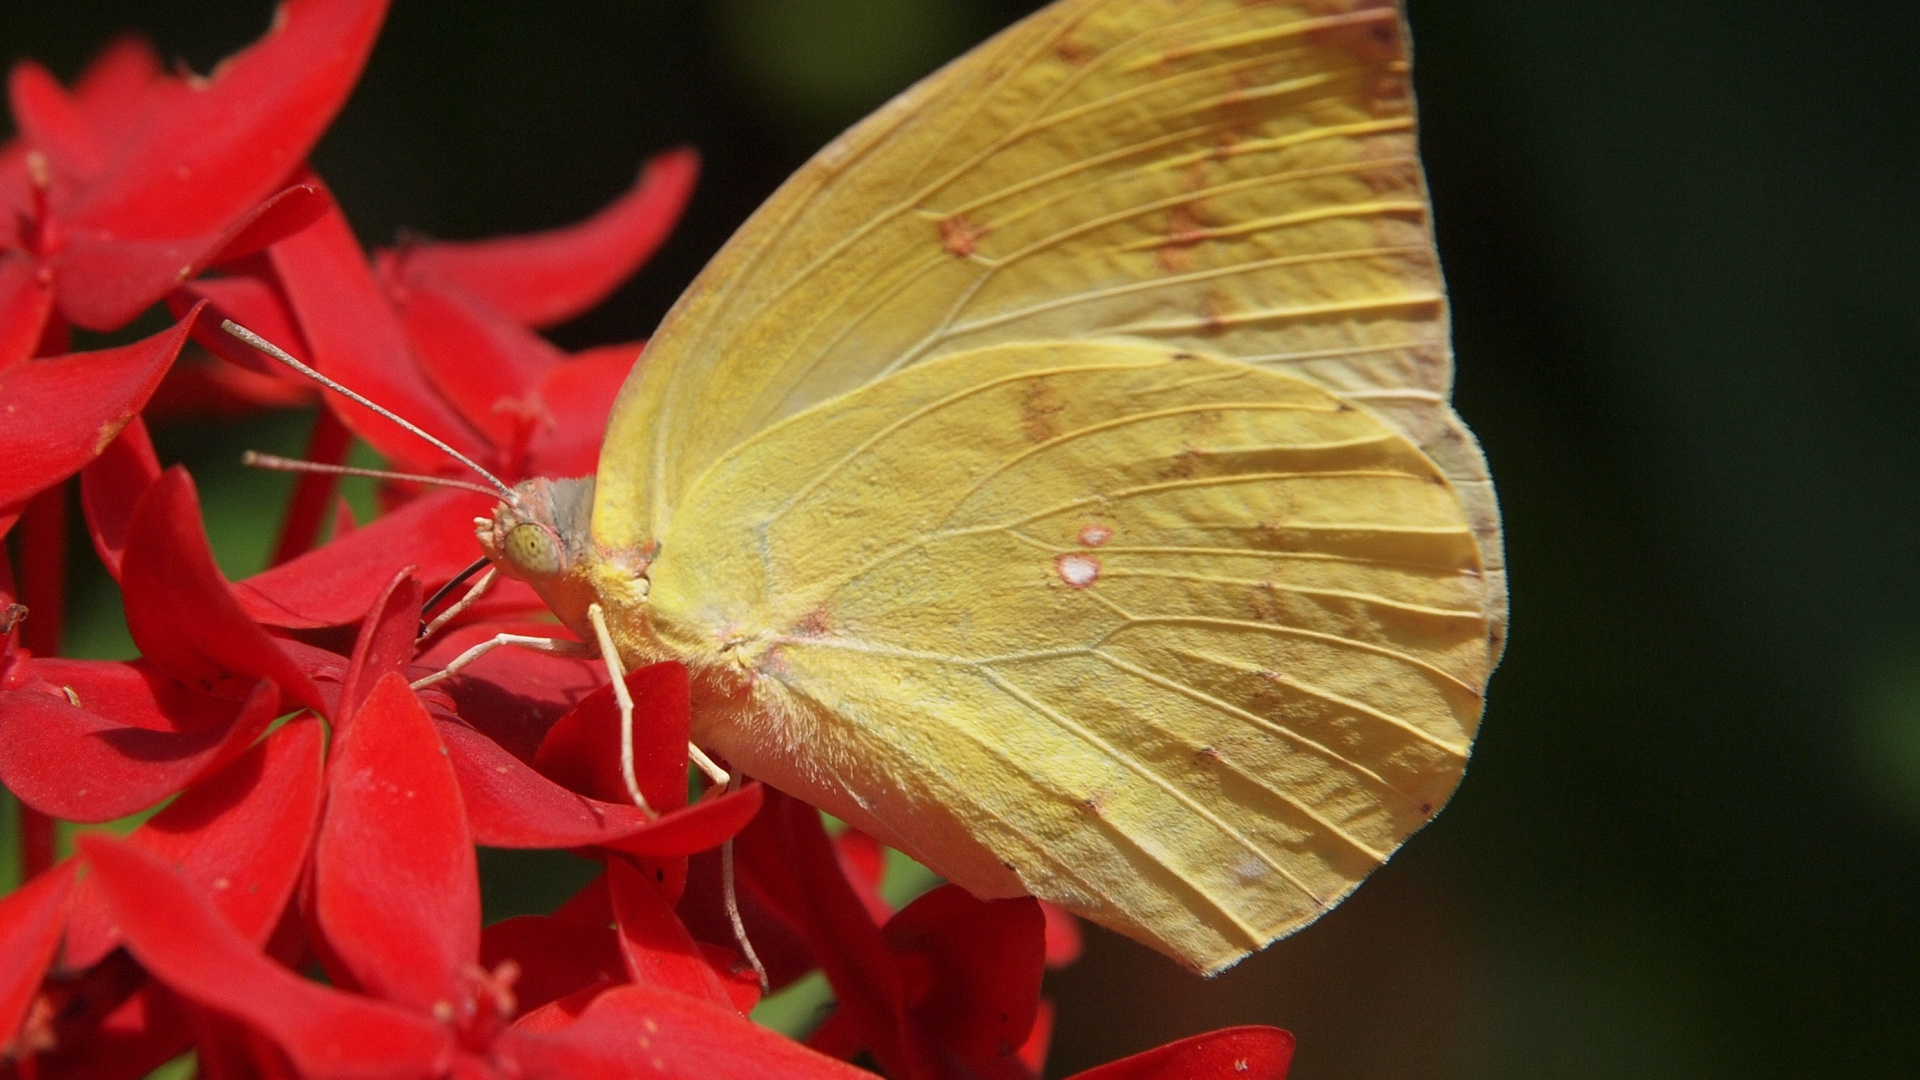 Yellow Butterfly Perched on Red Flower in Close up Photography During Daytime. Wallpaper in 1920x1080 Resolution